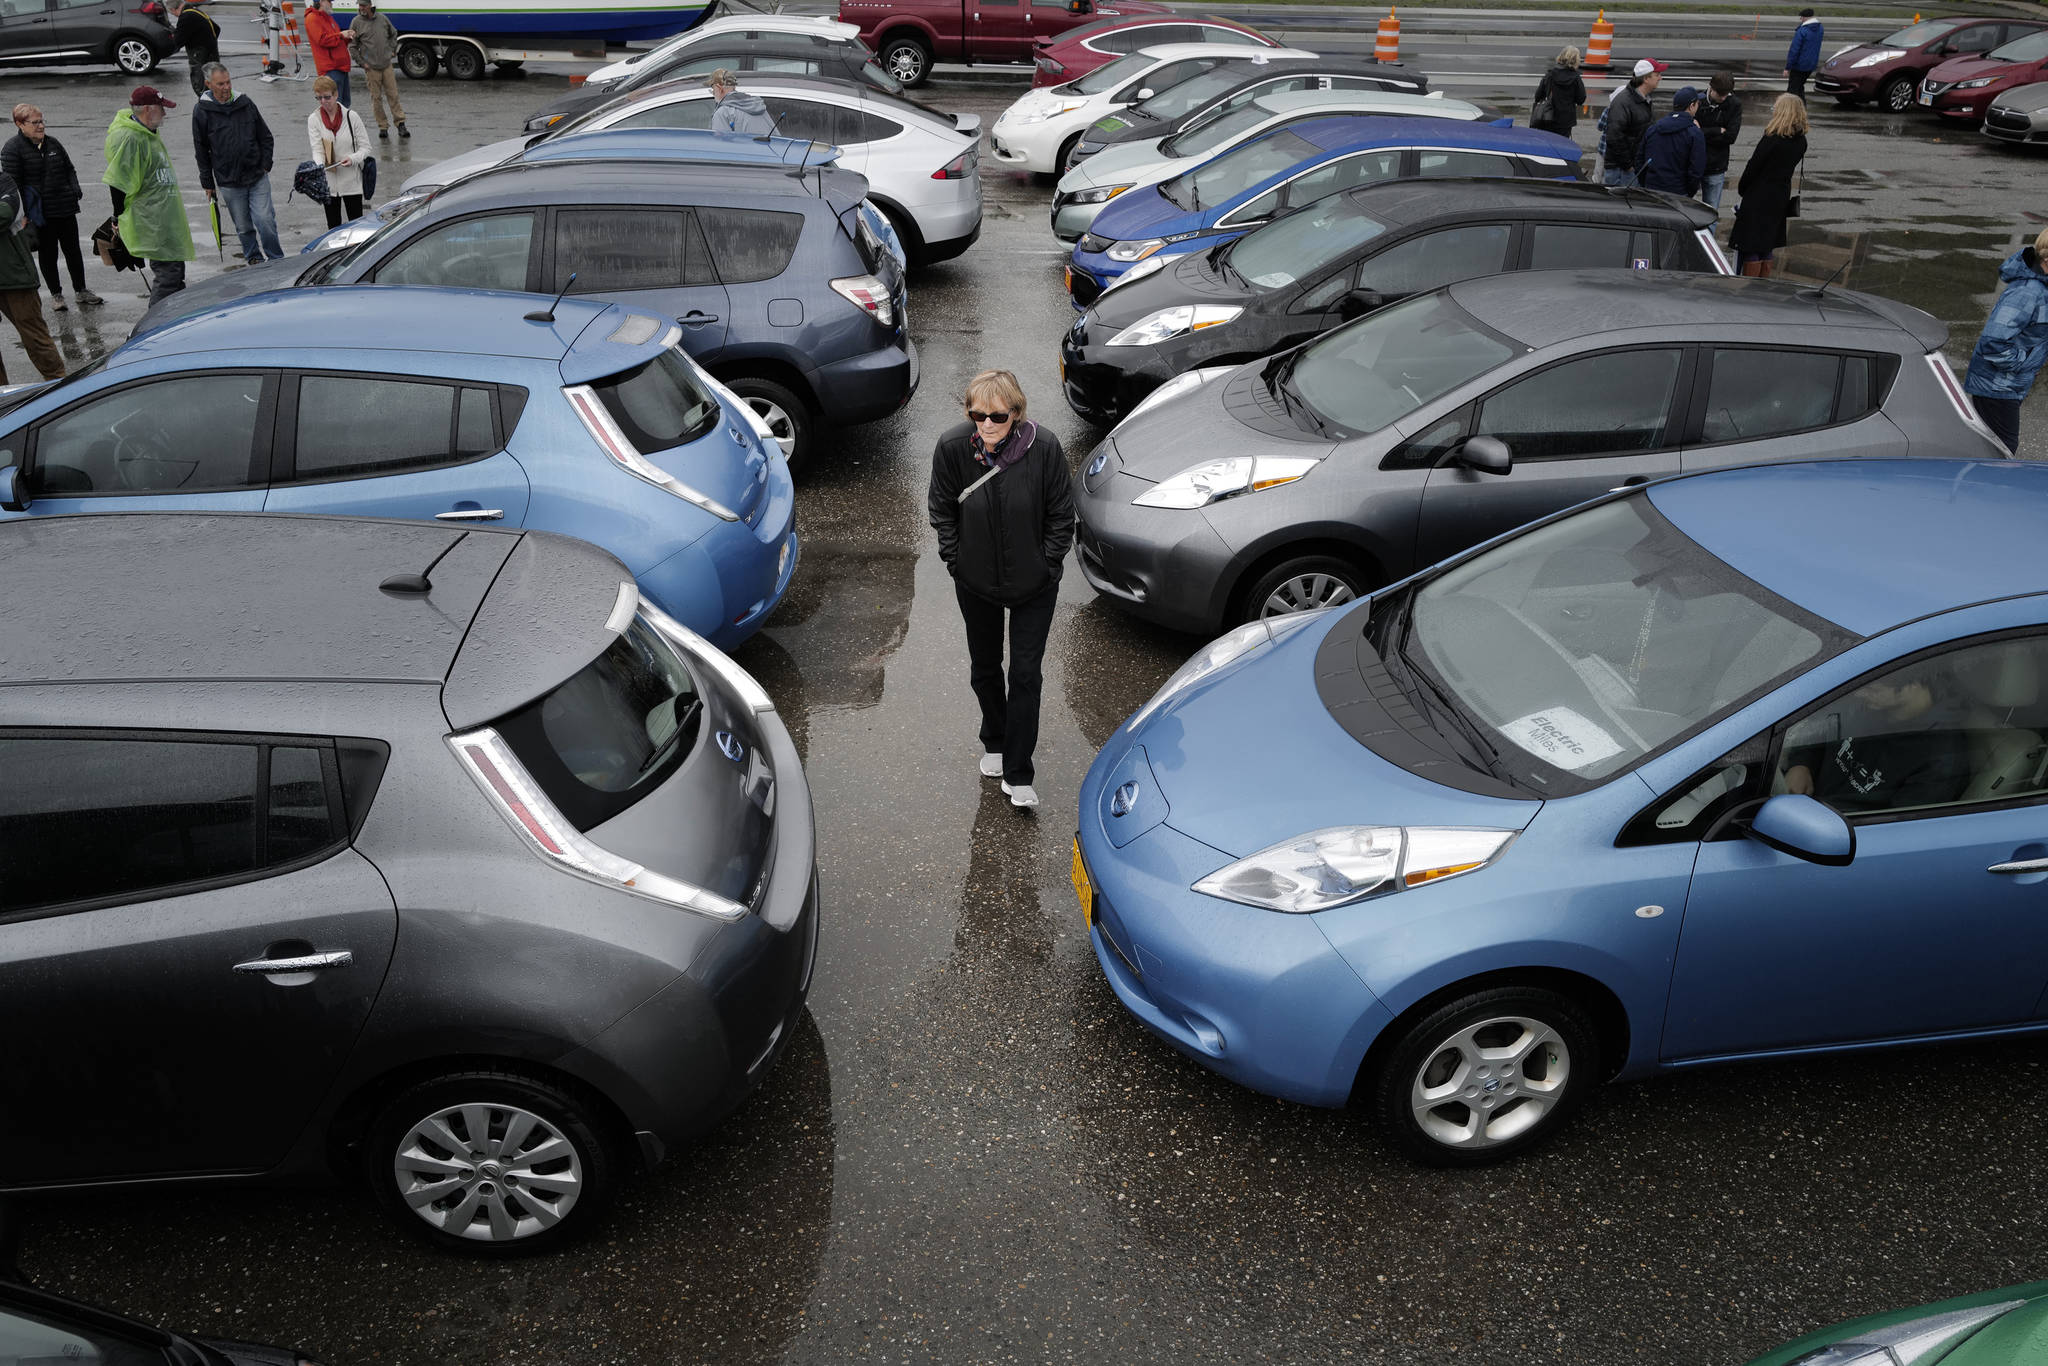 Photos: Rain doesn’t pull plug on electric vehicle roundup